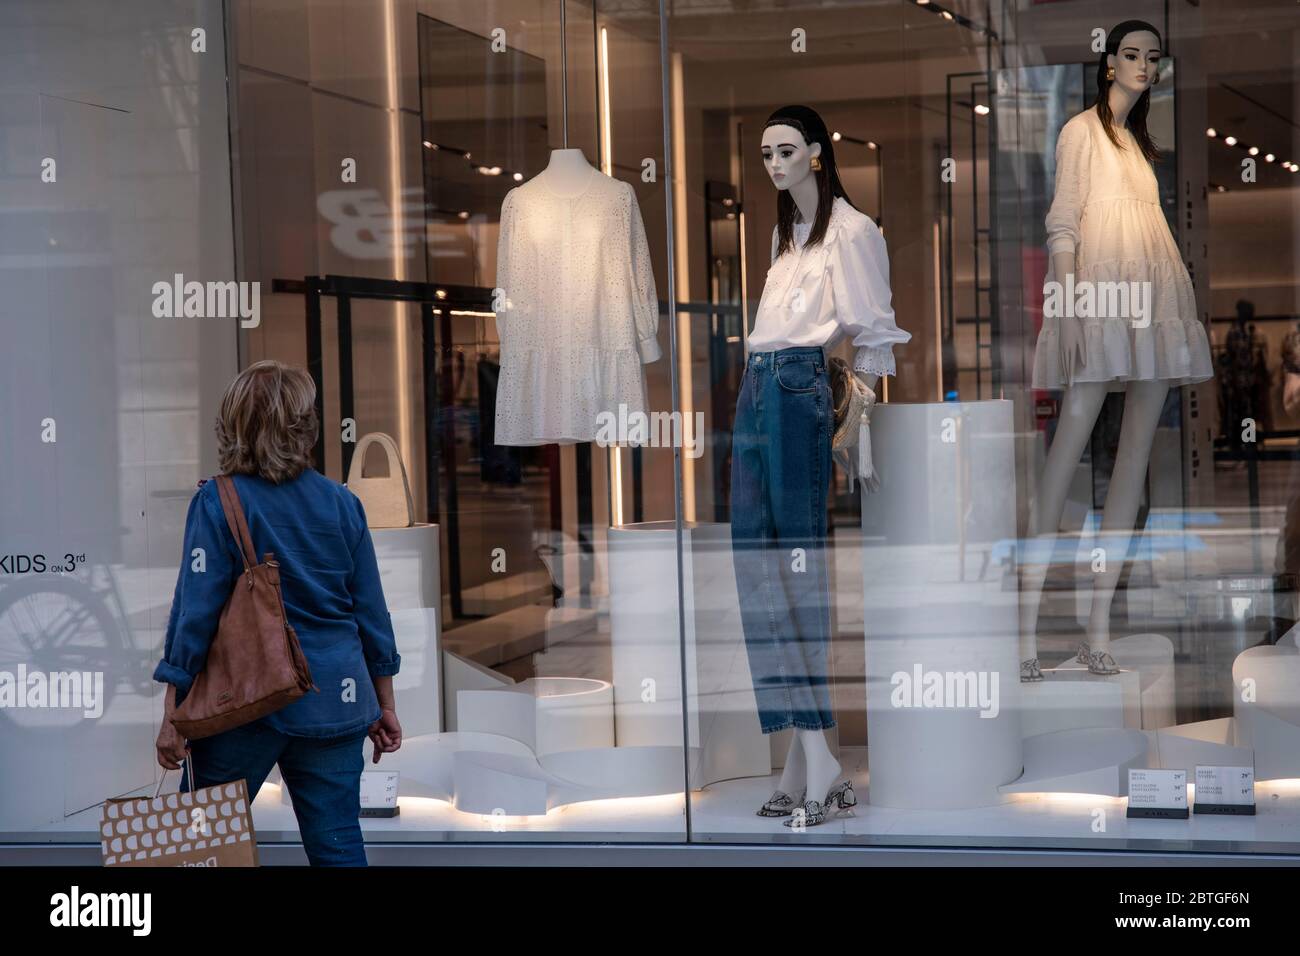 Barcelona, Spain. 25th May, 2020. A woman passing by an opened clothing  store from the downtown shopping area Portal del Angel in Barcelona, Spain  on 24th of May 2020. Starting today, the